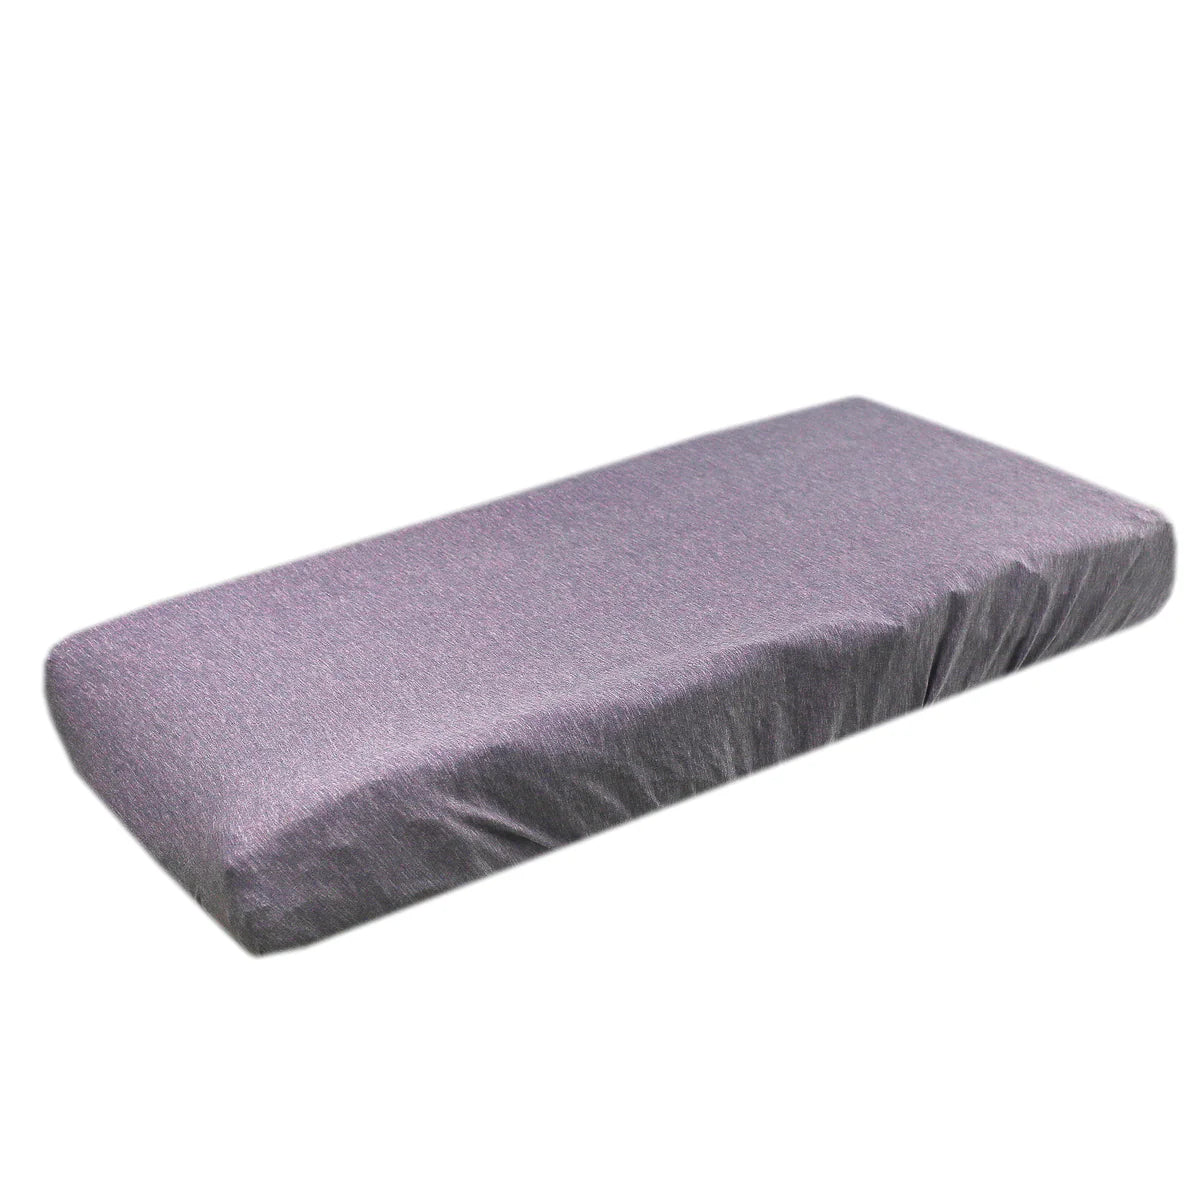 Copper Pearl Violet Premium Knit Diaper Changing Pad Cover-COPPER PEARL-Little Giant Kidz